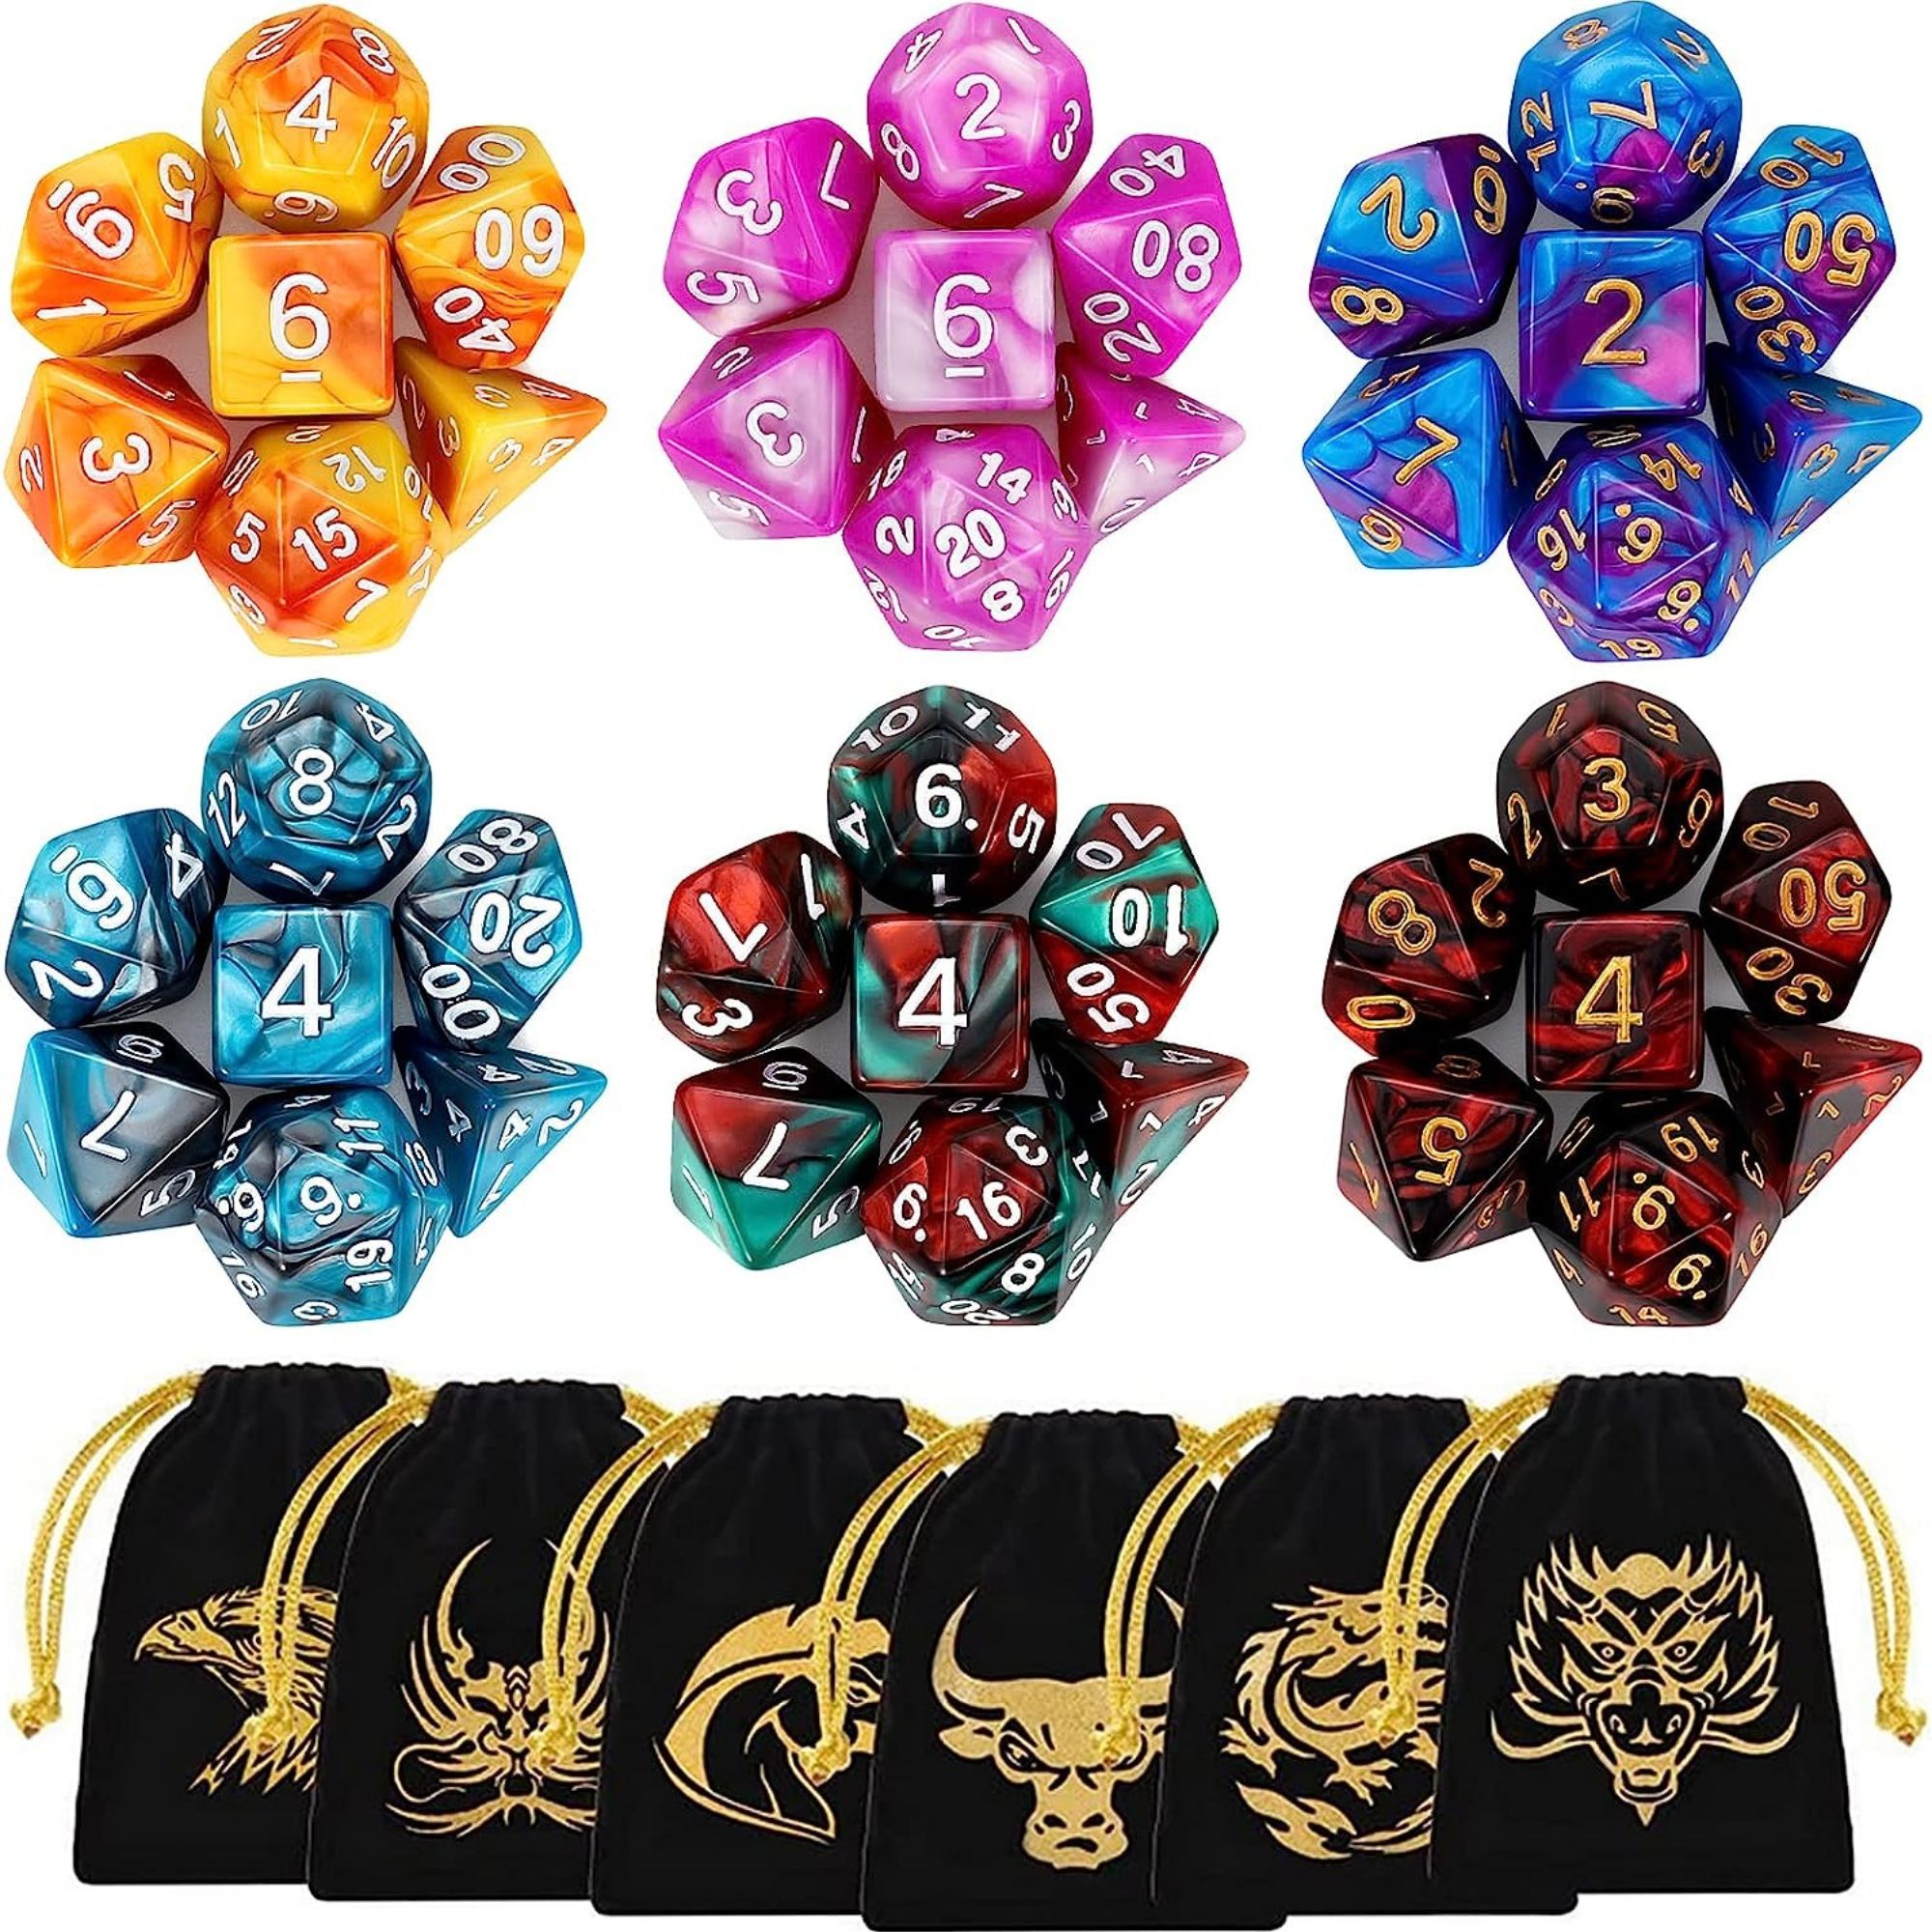 Product still of the QMay 6x7 D&D Double-Color Dice Sets on a white background